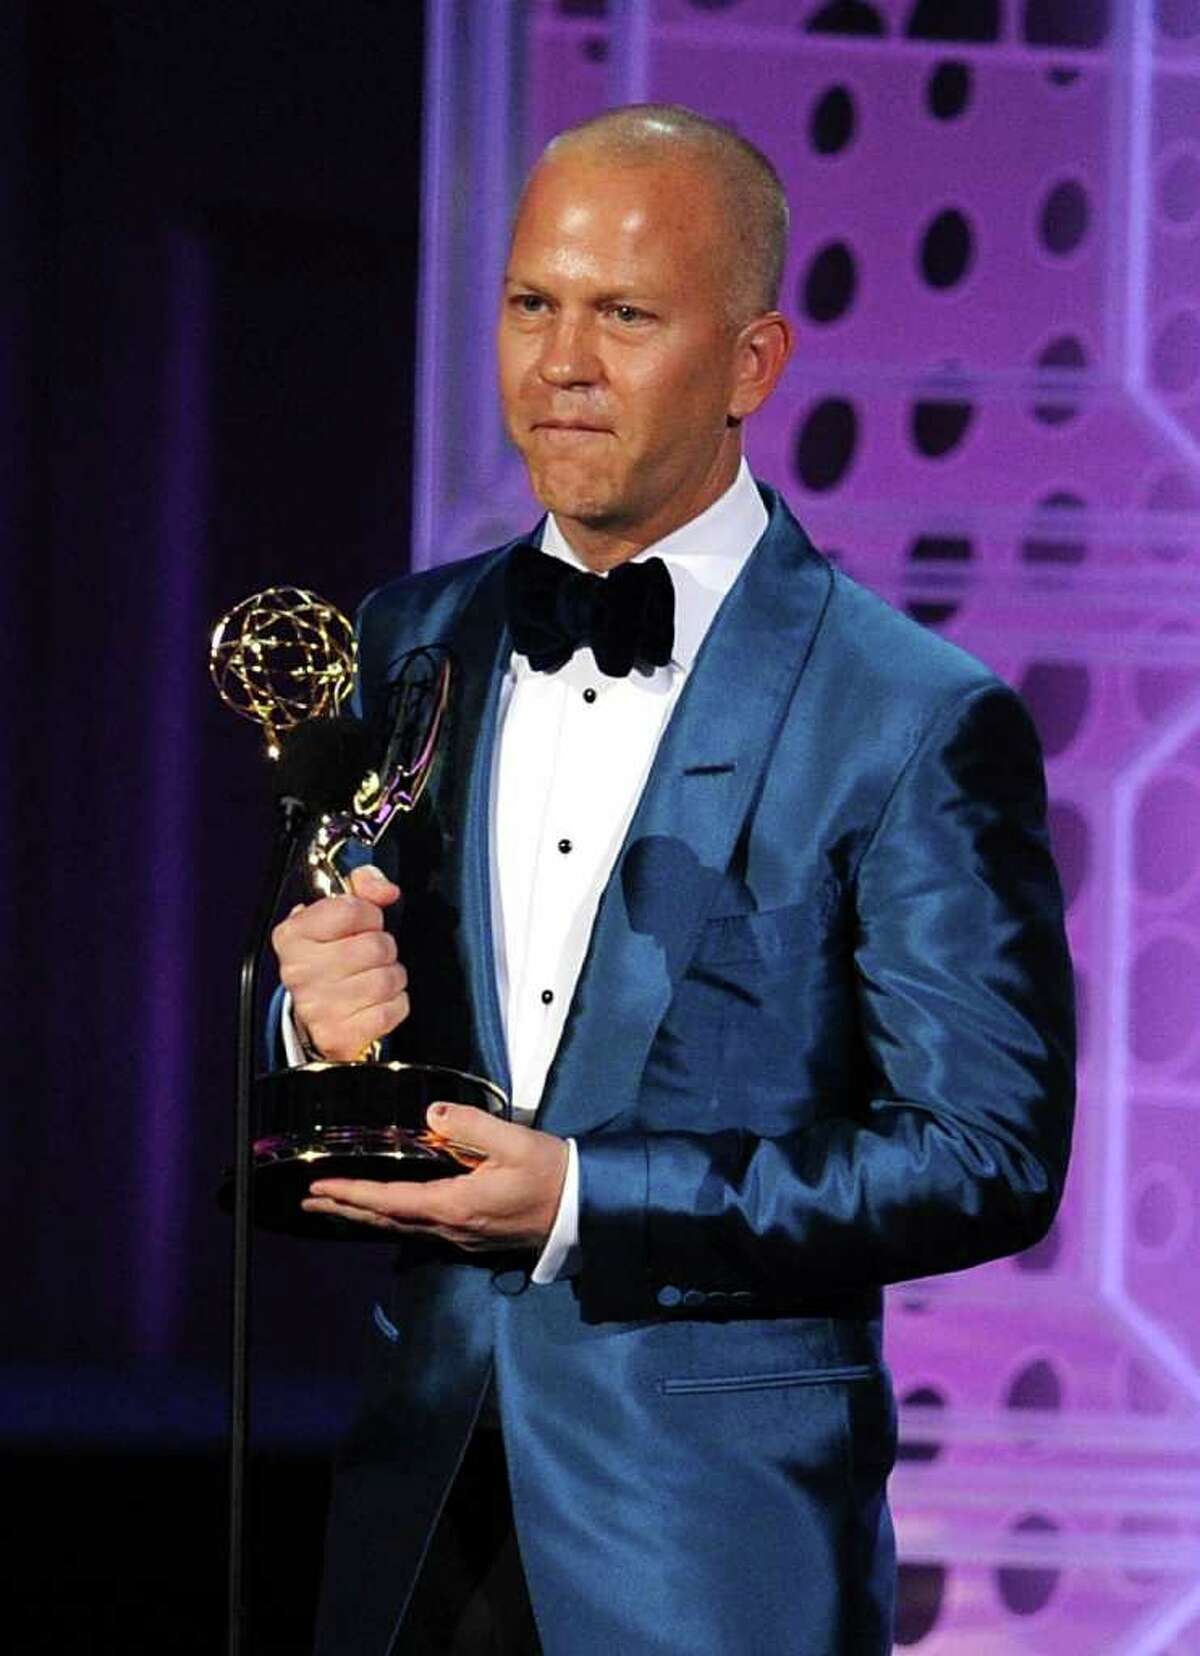 LOS ANGELES, CA - AUGUST 29: Writer/creator Ryan Murphy accepts the Outstanding Directing for a Comedy Series award onstage at the 62nd Annual Primetime Emmy Awards held at the Nokia Theatre L.A. Live on August 29, 2010 in Los Angeles, California. (Photo by Kevin Winter/Getty Images) *** Local Caption *** Ryan Murphy